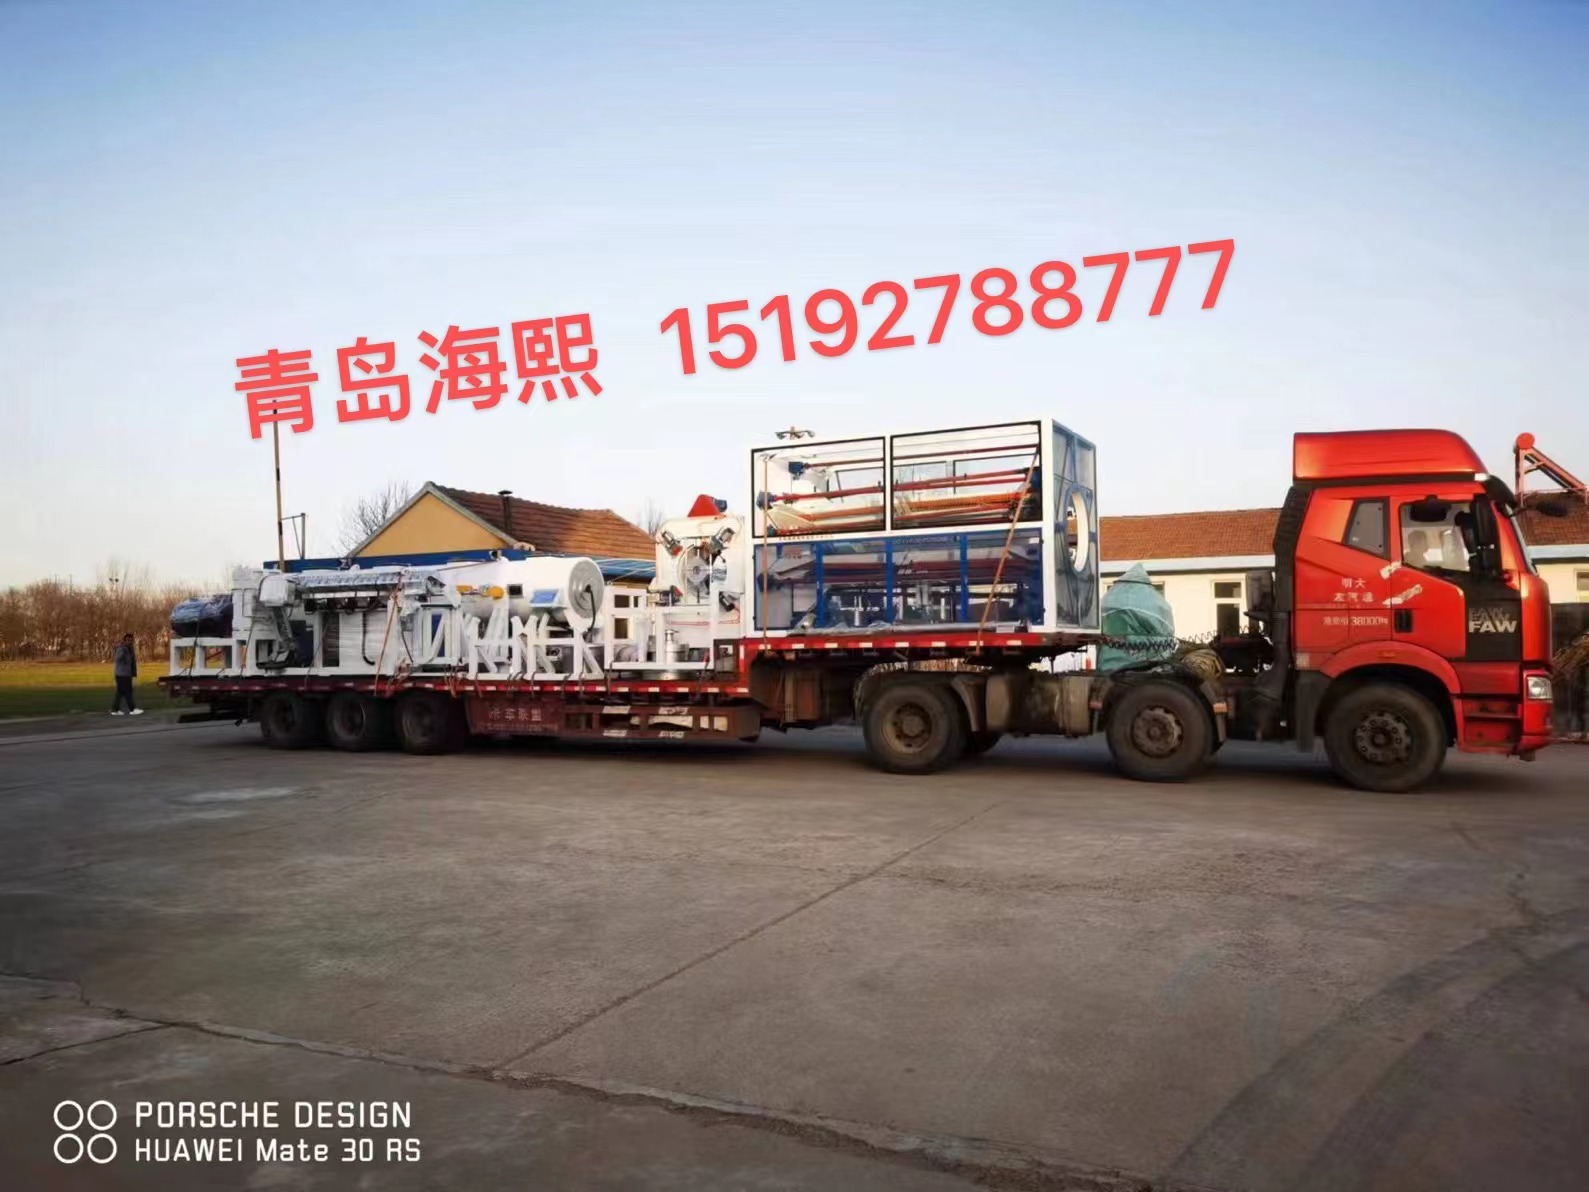 Hebei Kangye Pipeline Insulation and Anticorrosion